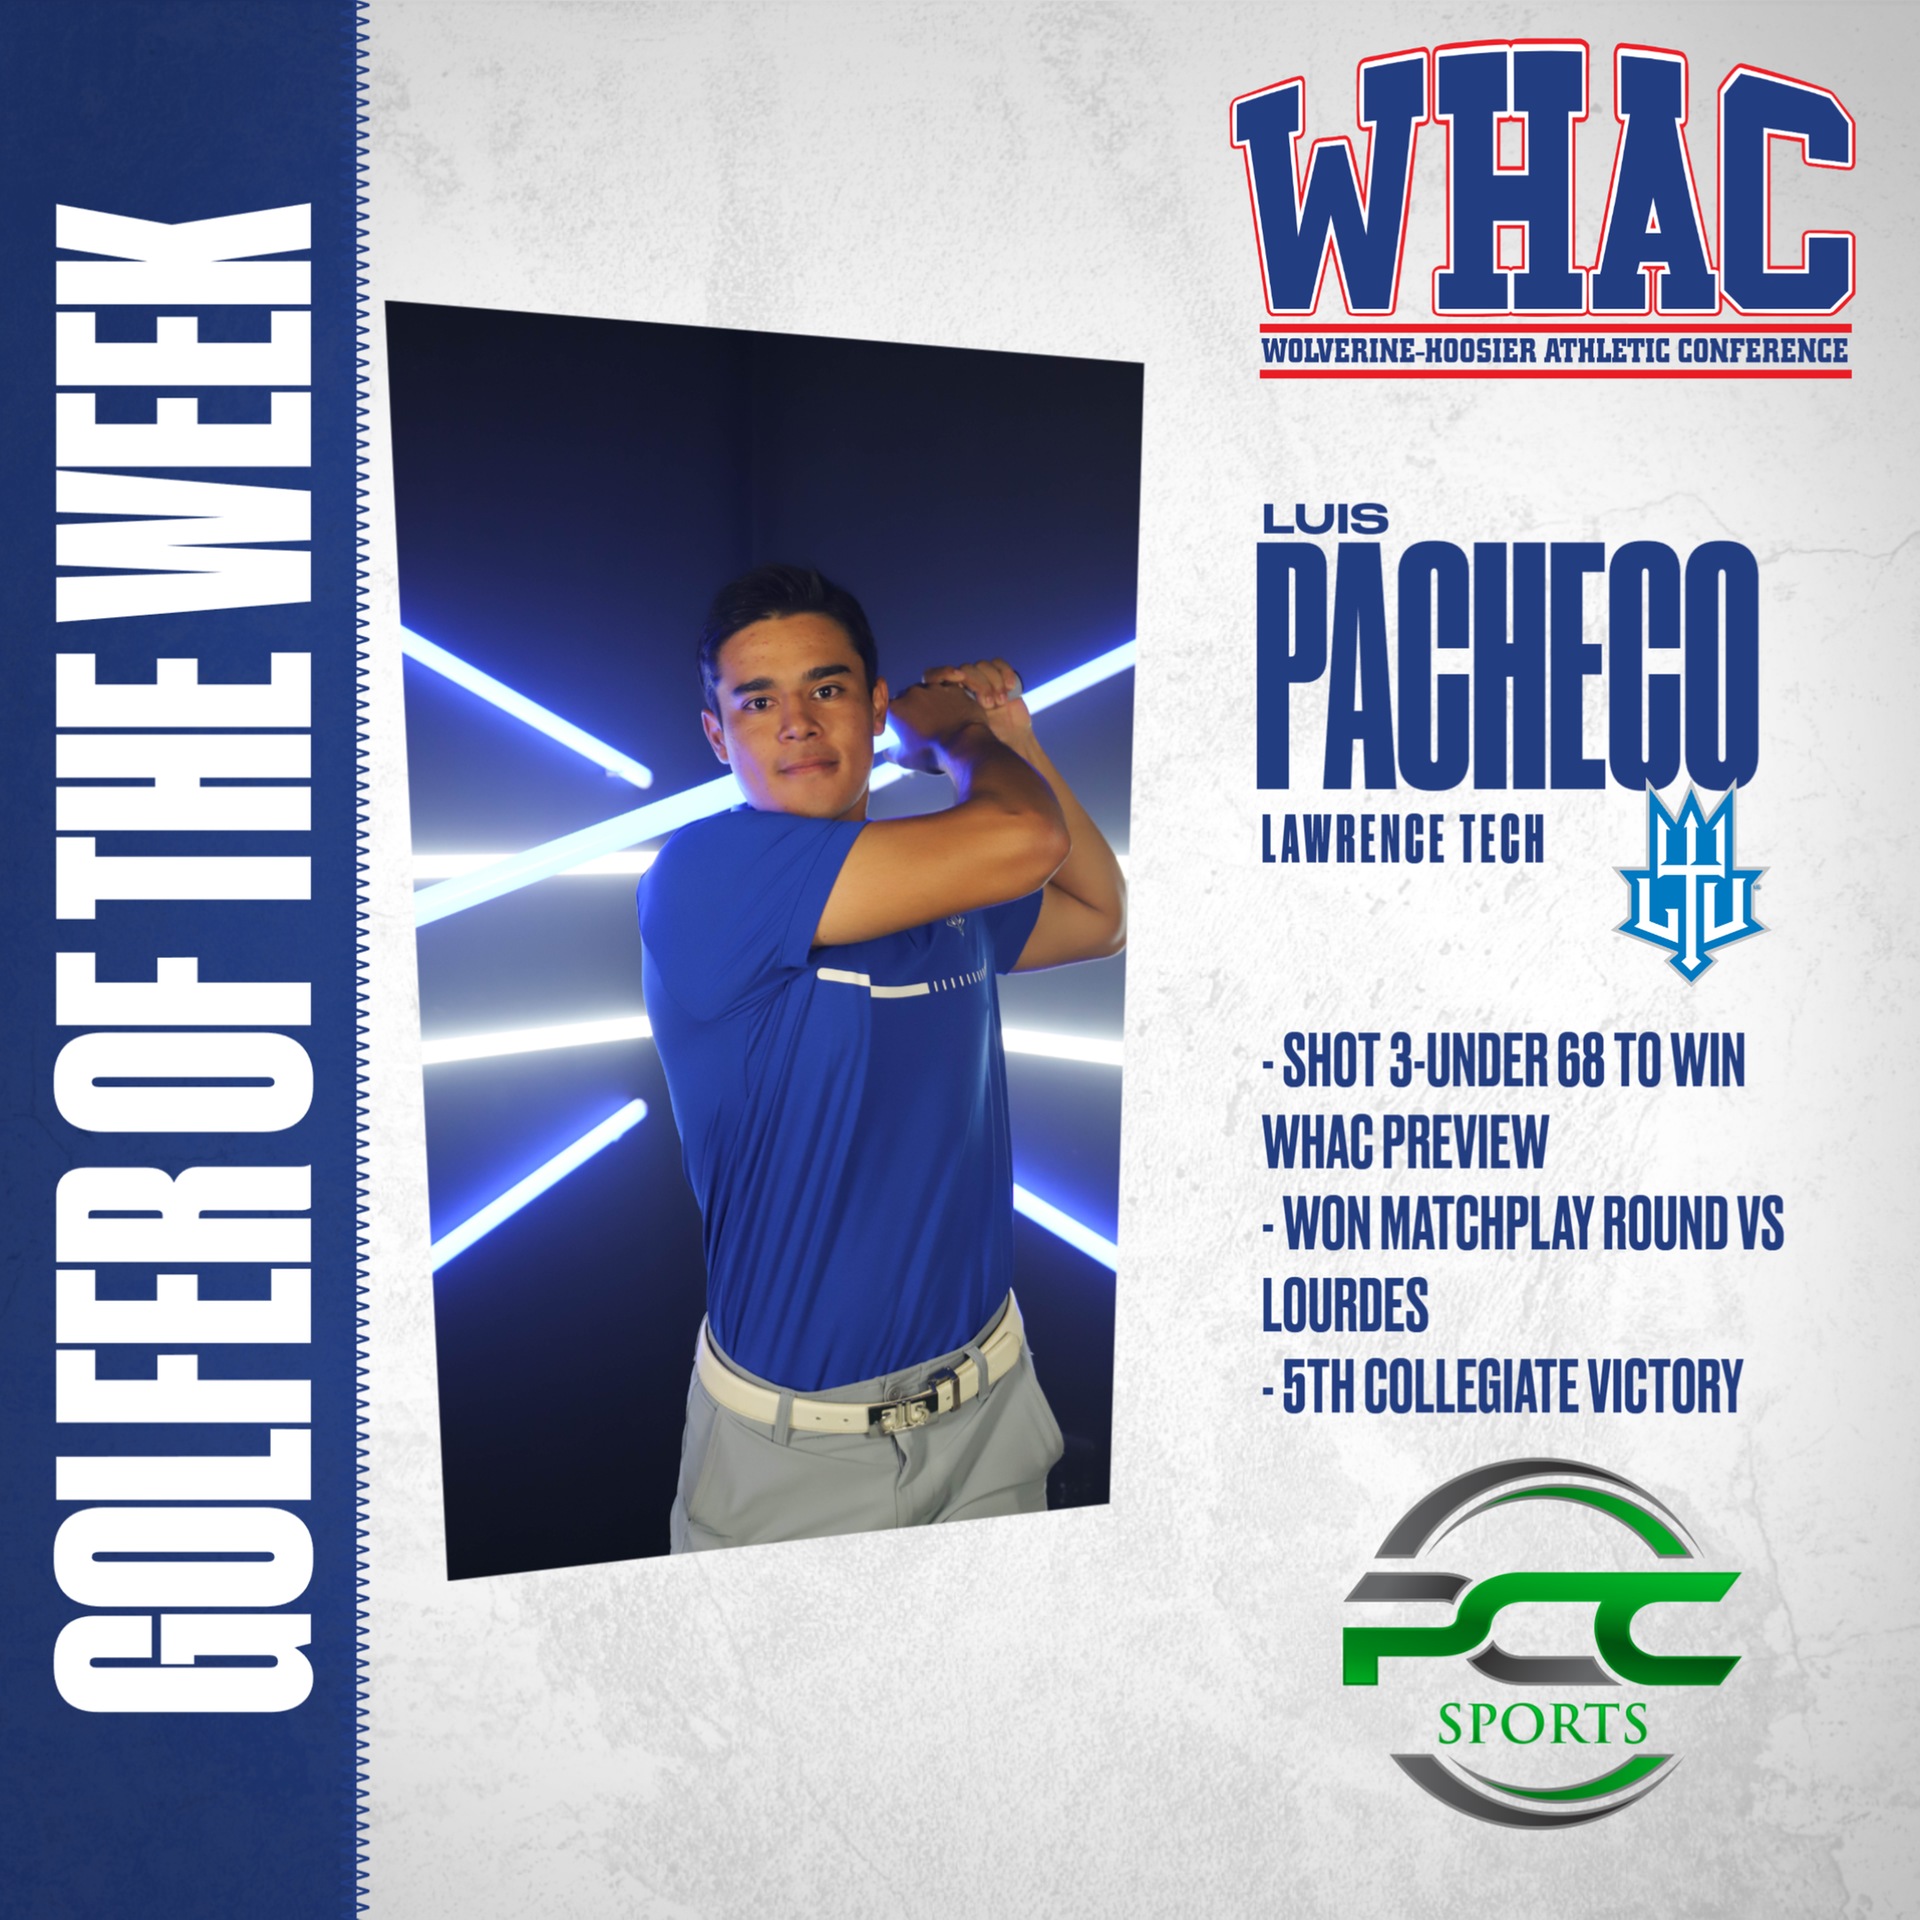 Lawrence Tech's Luis Pacheco named Golfer of the Week